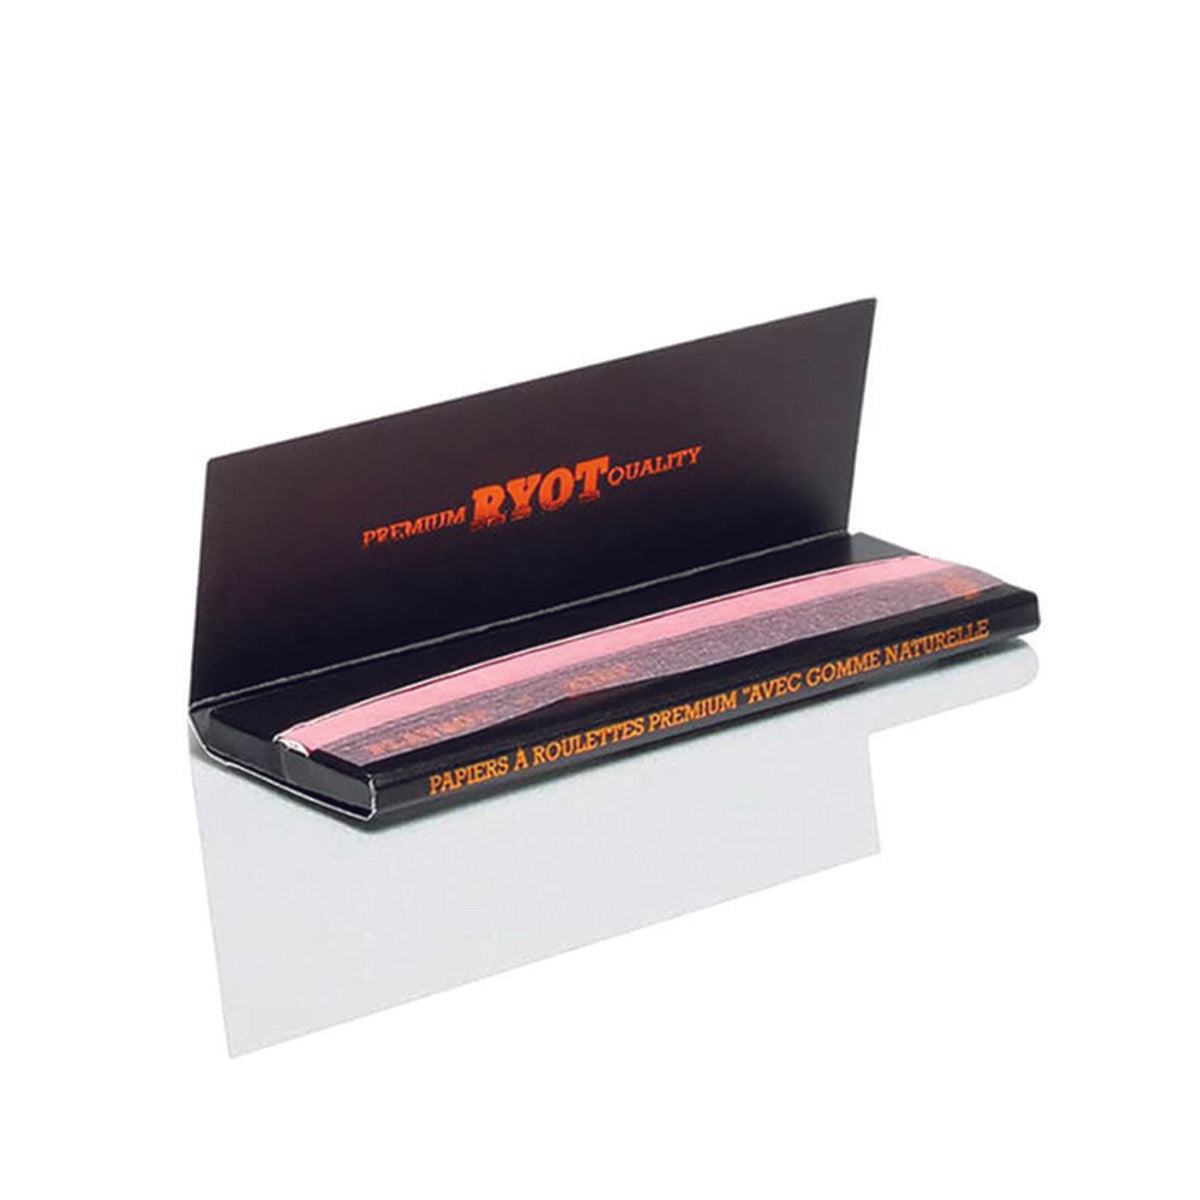 playboy ryot rolling papers rose gold